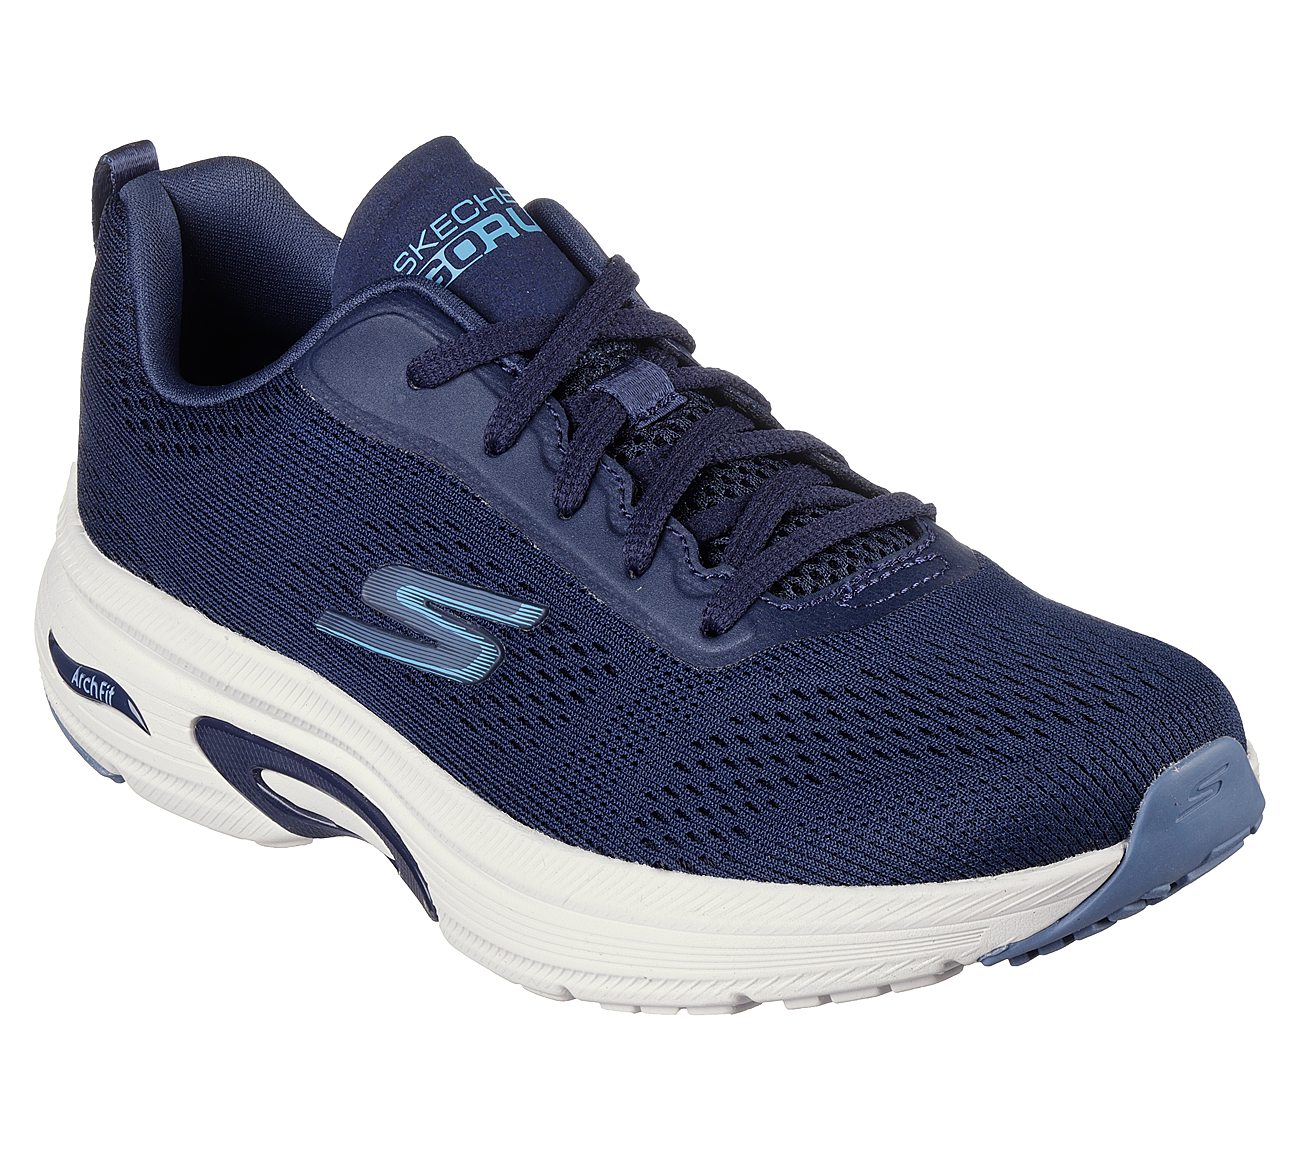 GO RUN ARCH FIT - SKYWAY, Navy image number null